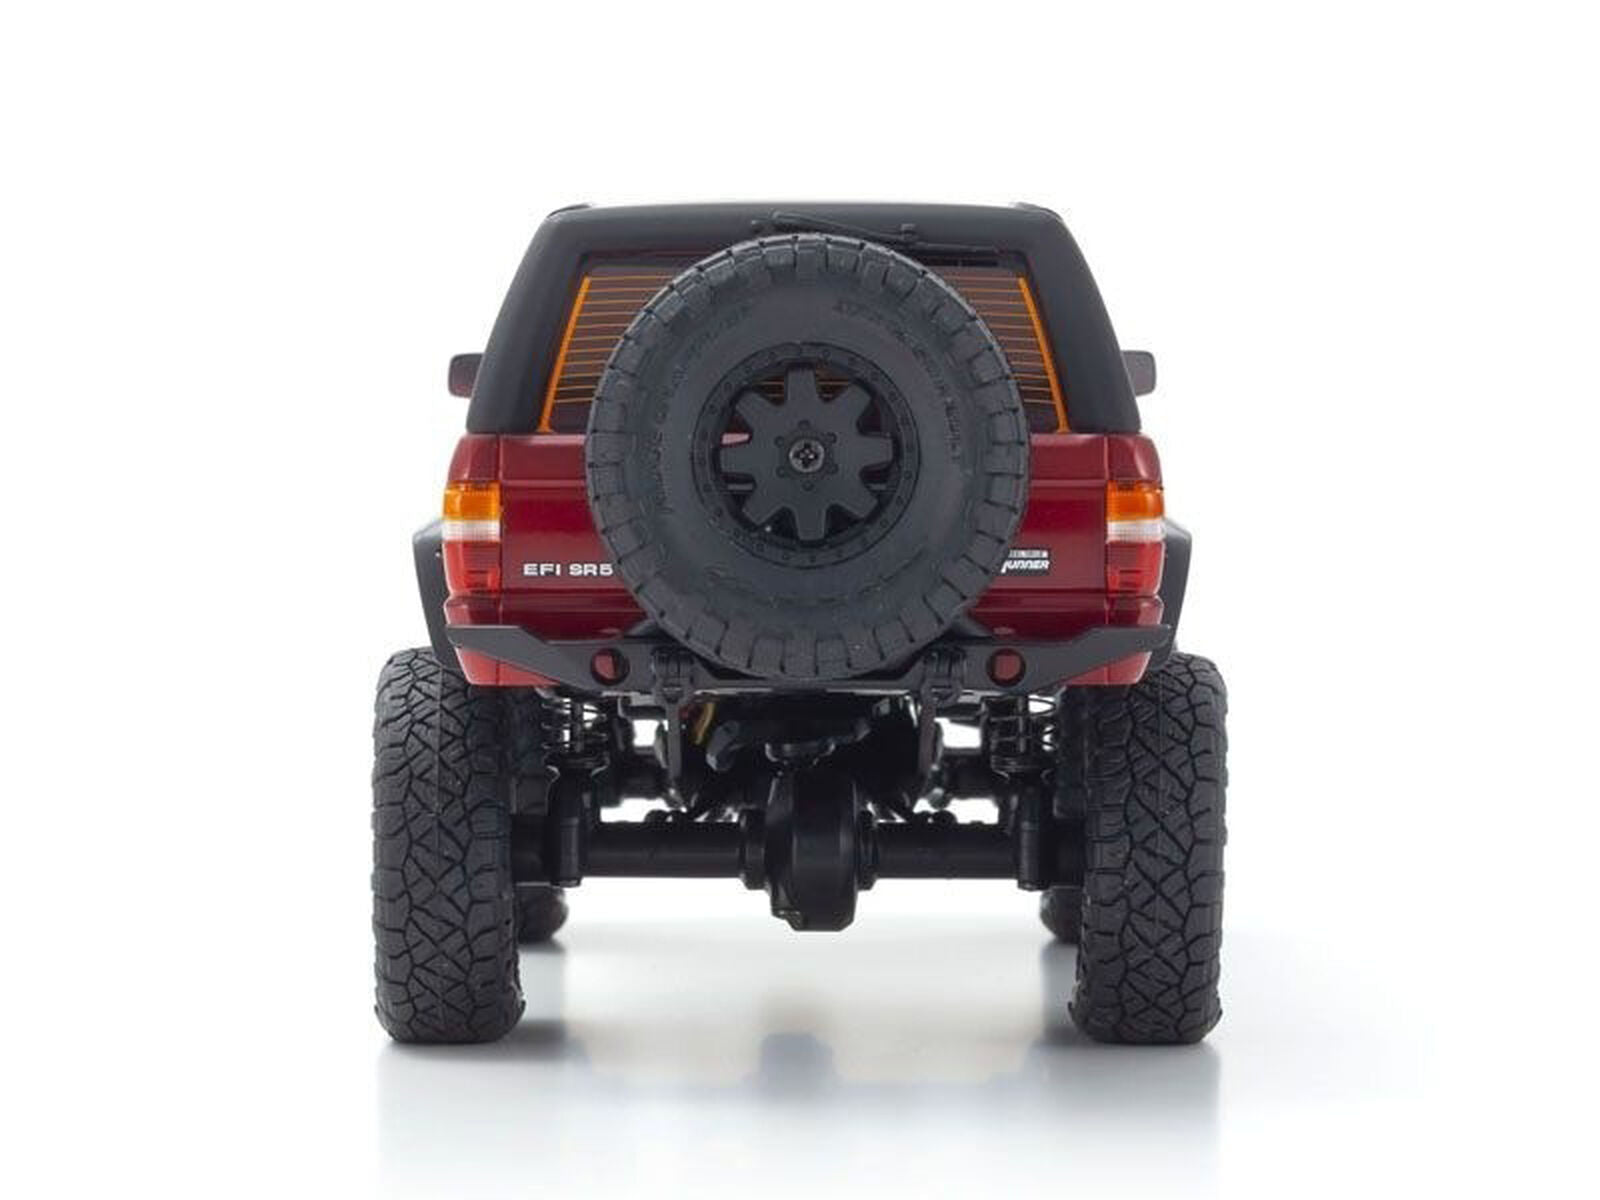 *DISCONTINUED* NMini-Z 4X4 Toyota 4 Runner (HiLux Surf), Metallic Red, Ready Set